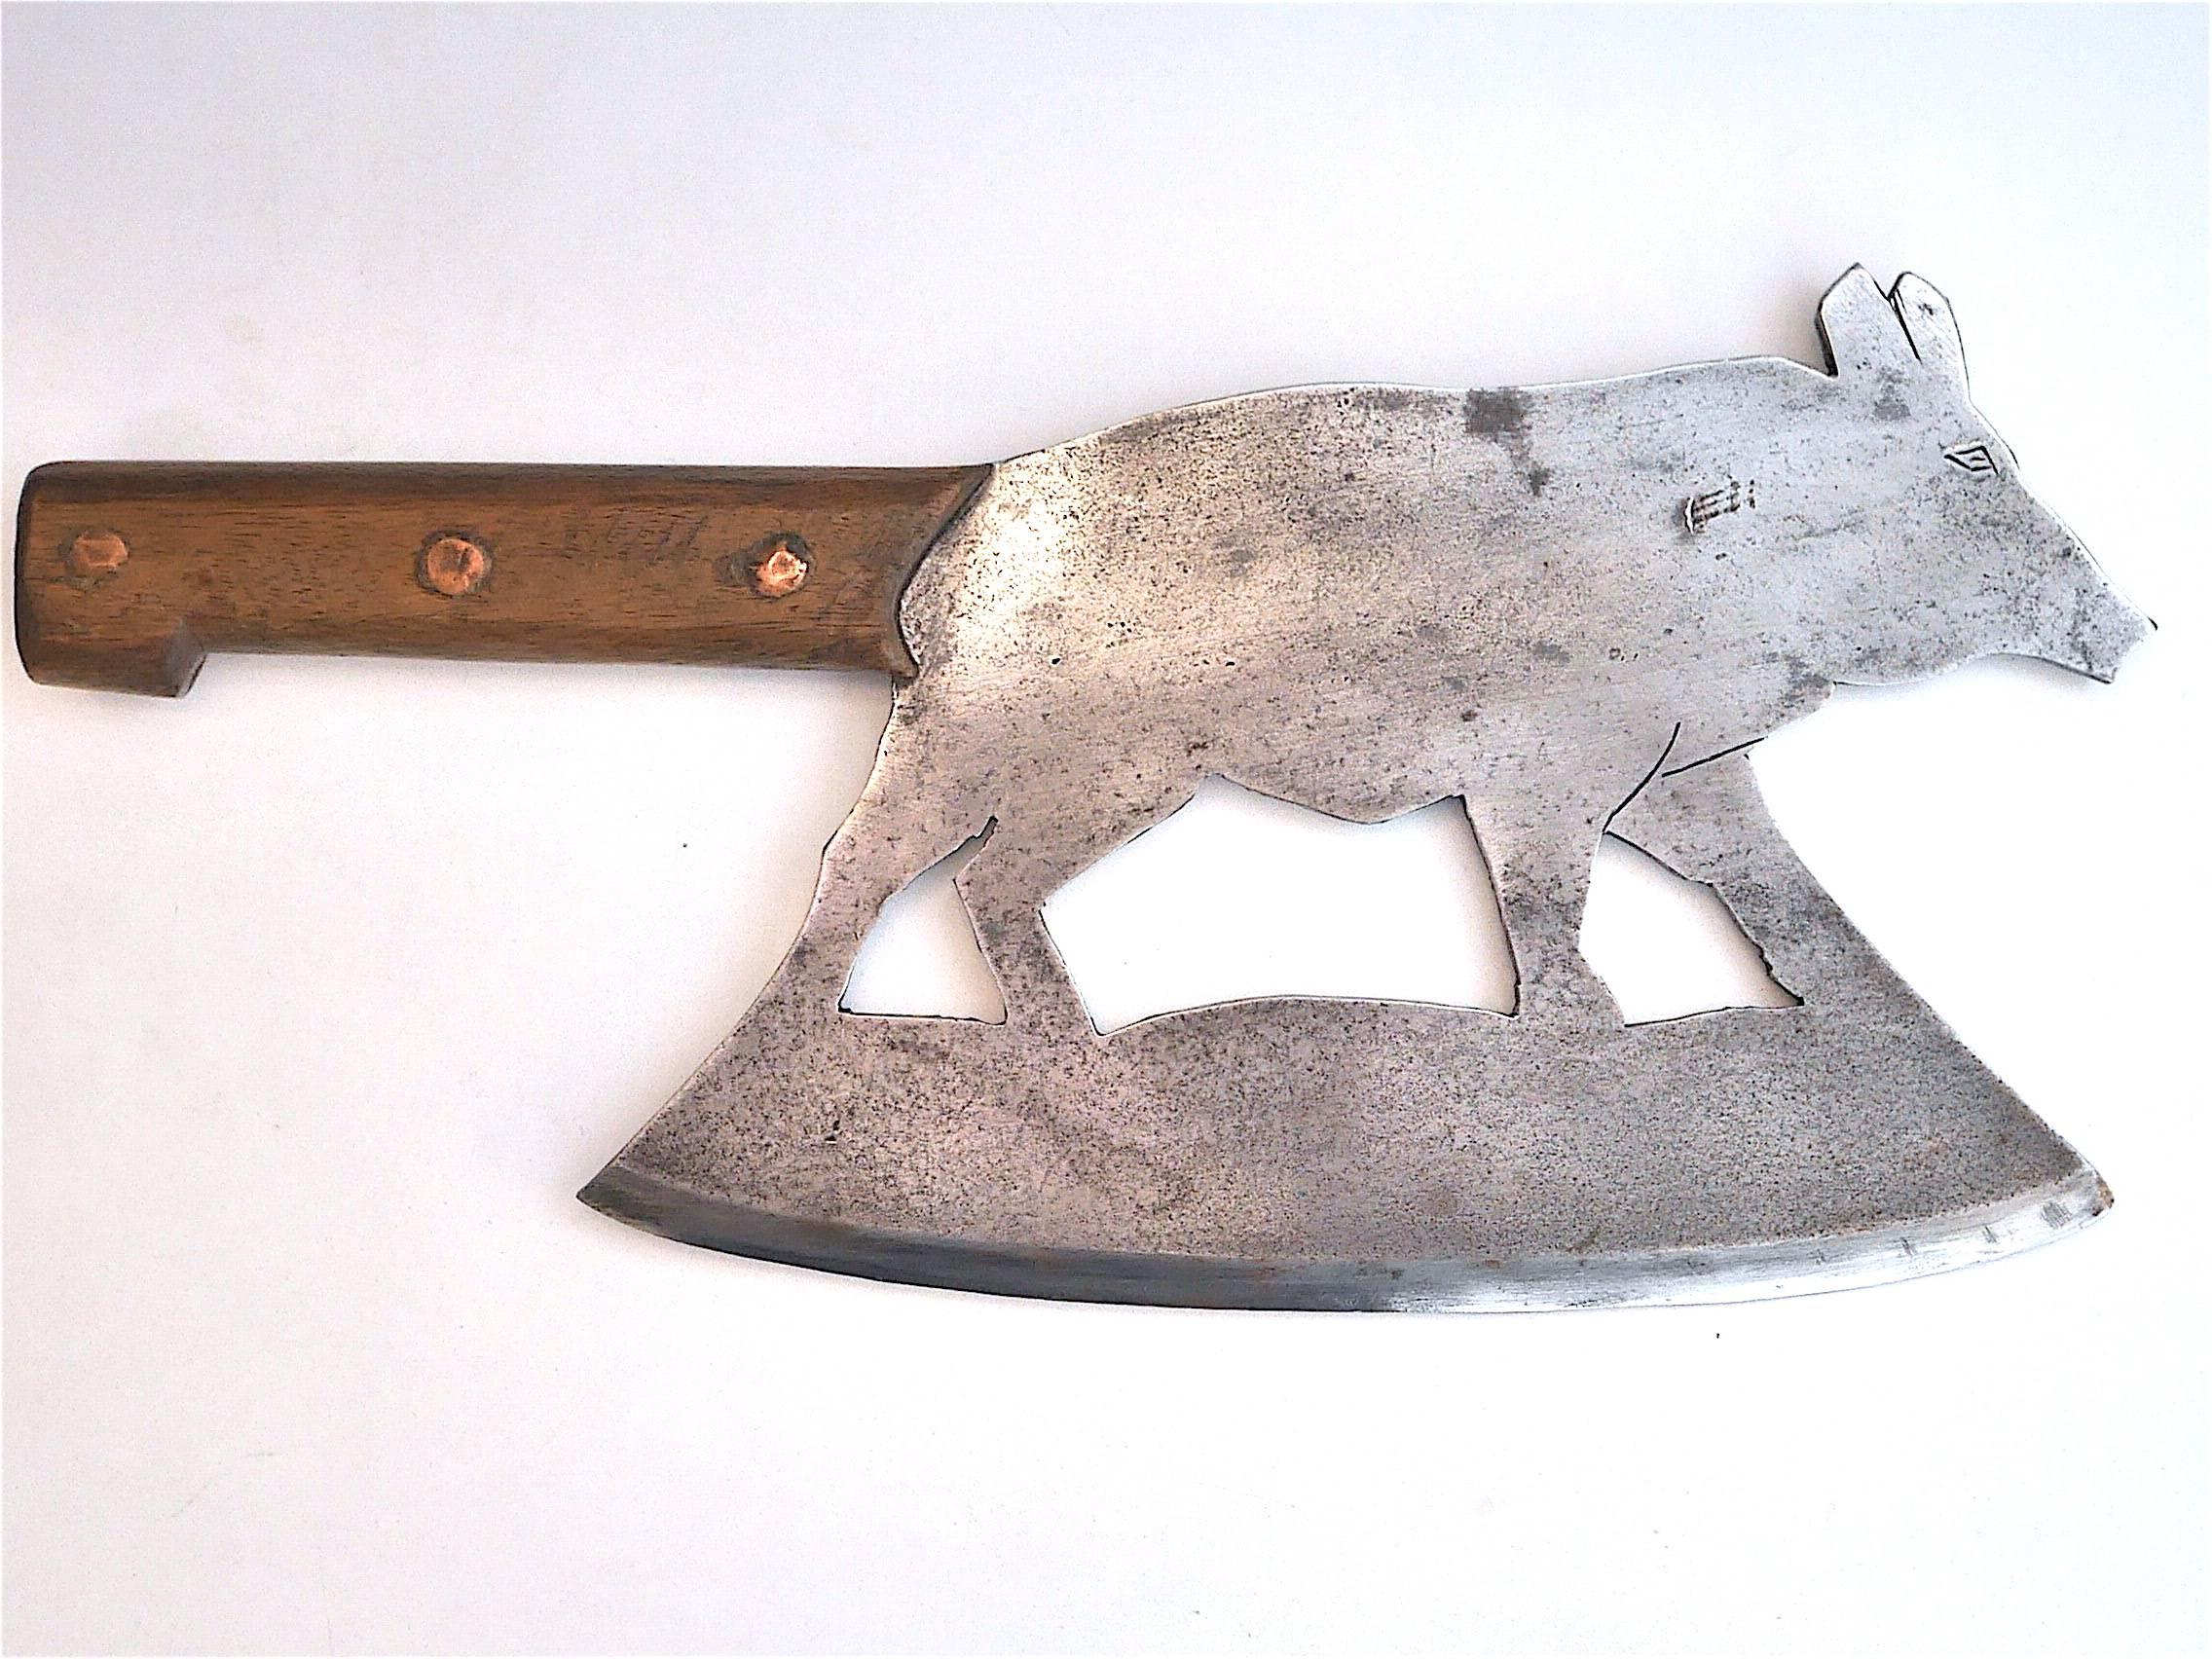 20th century cast Iron cleaver featuring a boar, France.